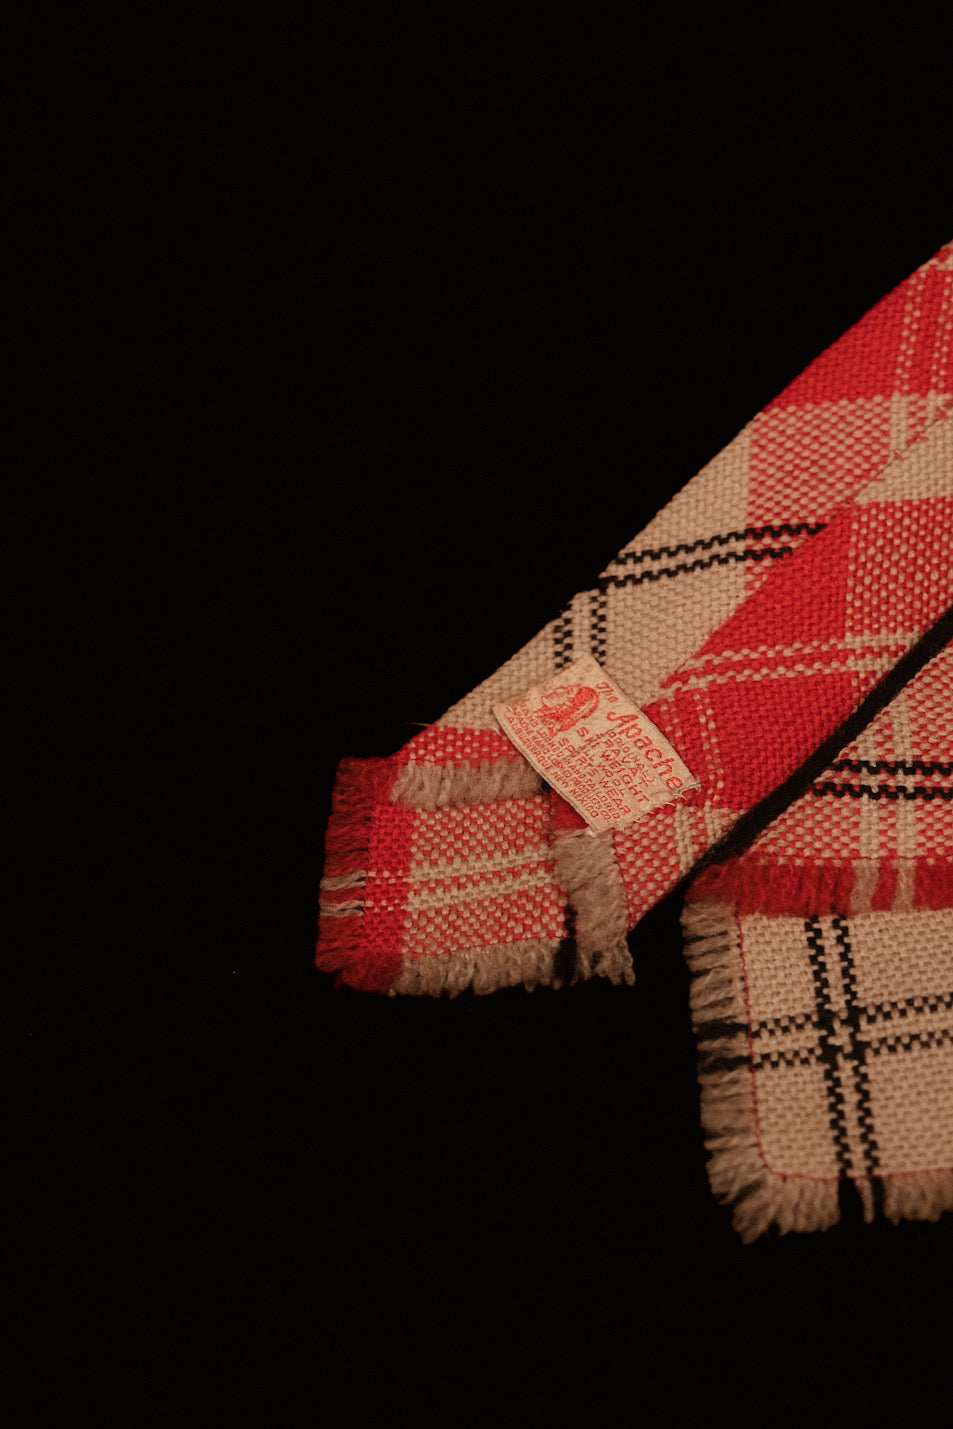 Light Red And Cream Plaid Native American Tie By Apache Weavers, New Mexico